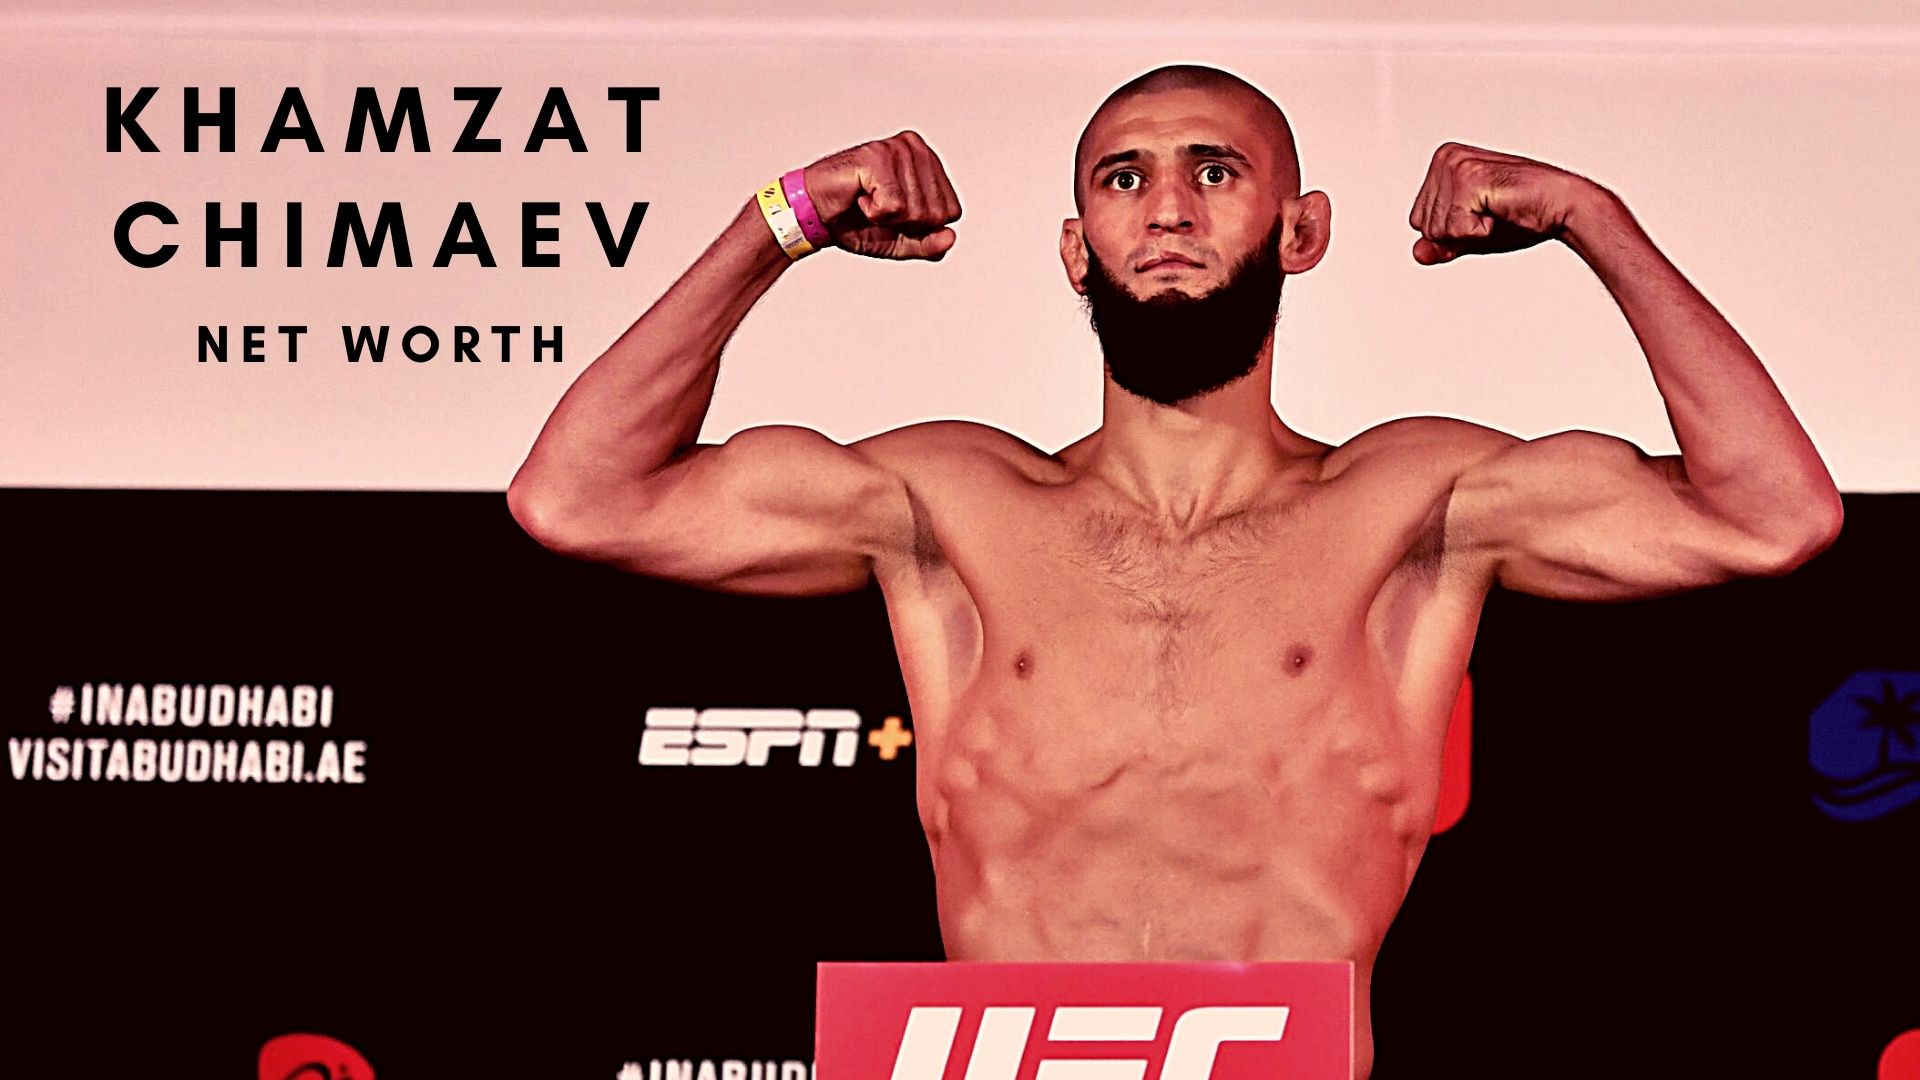 What is the net worth of UFC star Khamzat Chimaev in the year 2021?